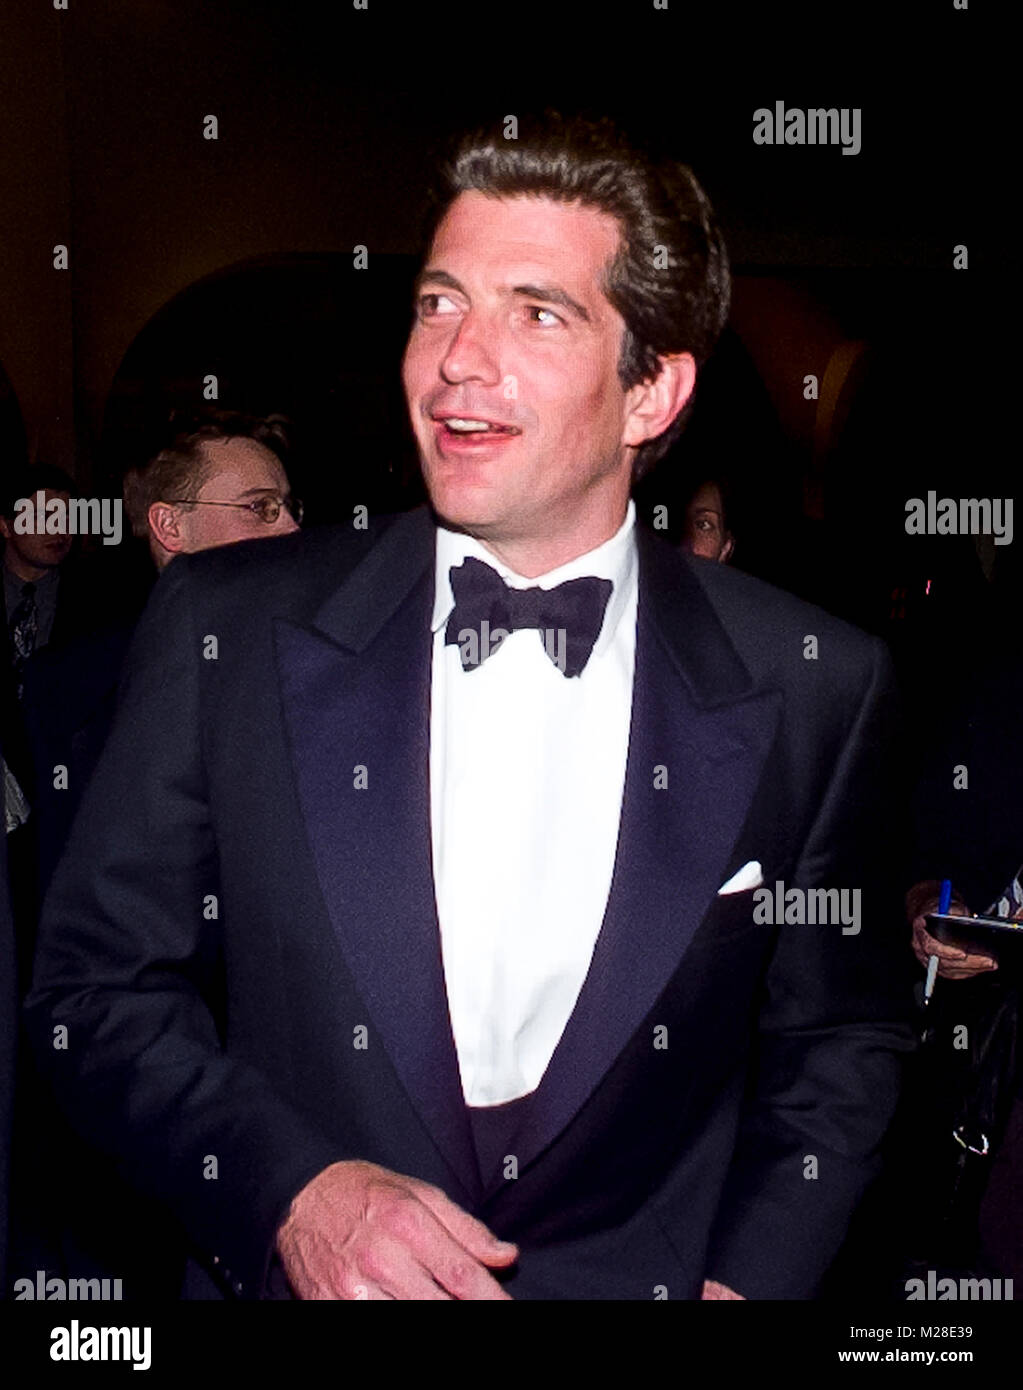 New Doc Makes Bombshell Claims About John F. Kennedy Jr. & Carolyn  Bessette's Marriage